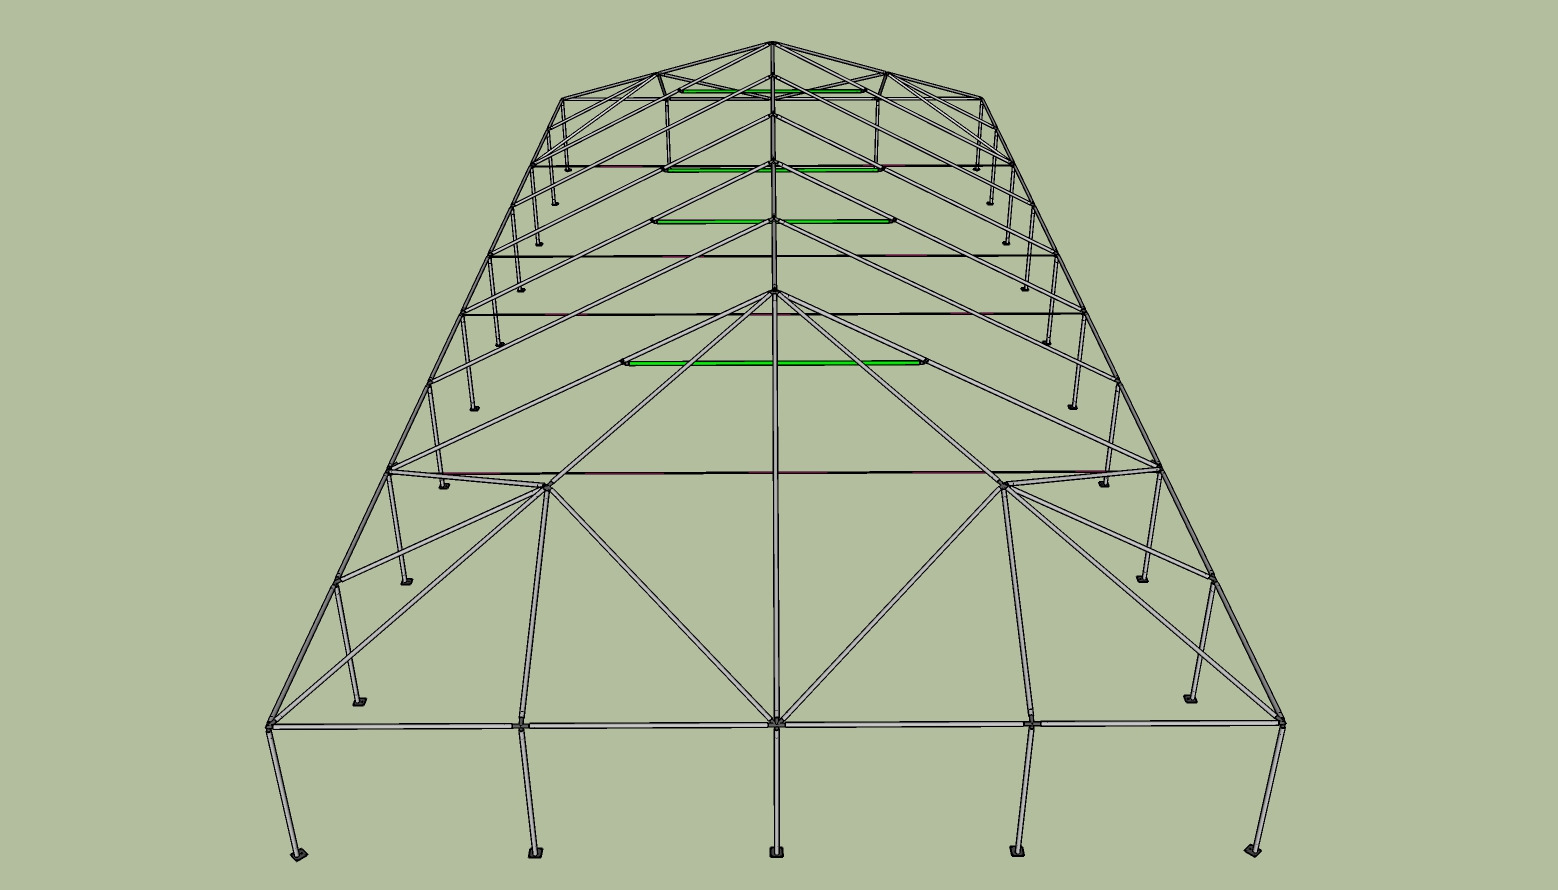 40x90 frame tent side view